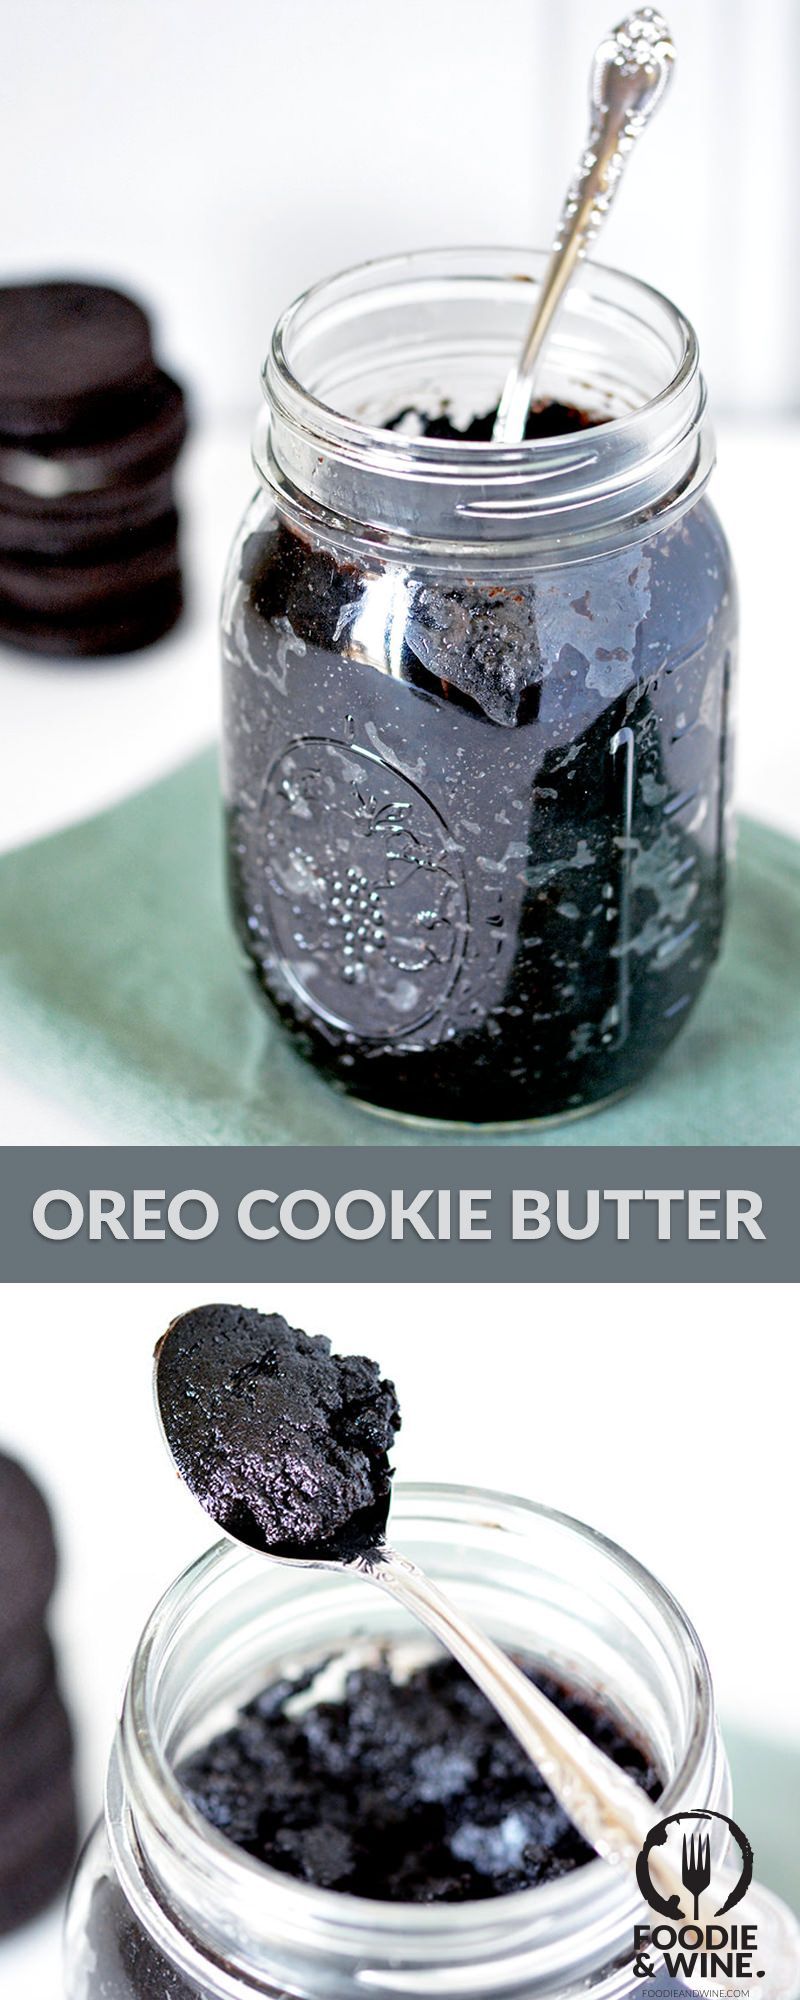 Oreo Cookie Butter - Foodie and Wine -   20 desserts Oreo god ideas